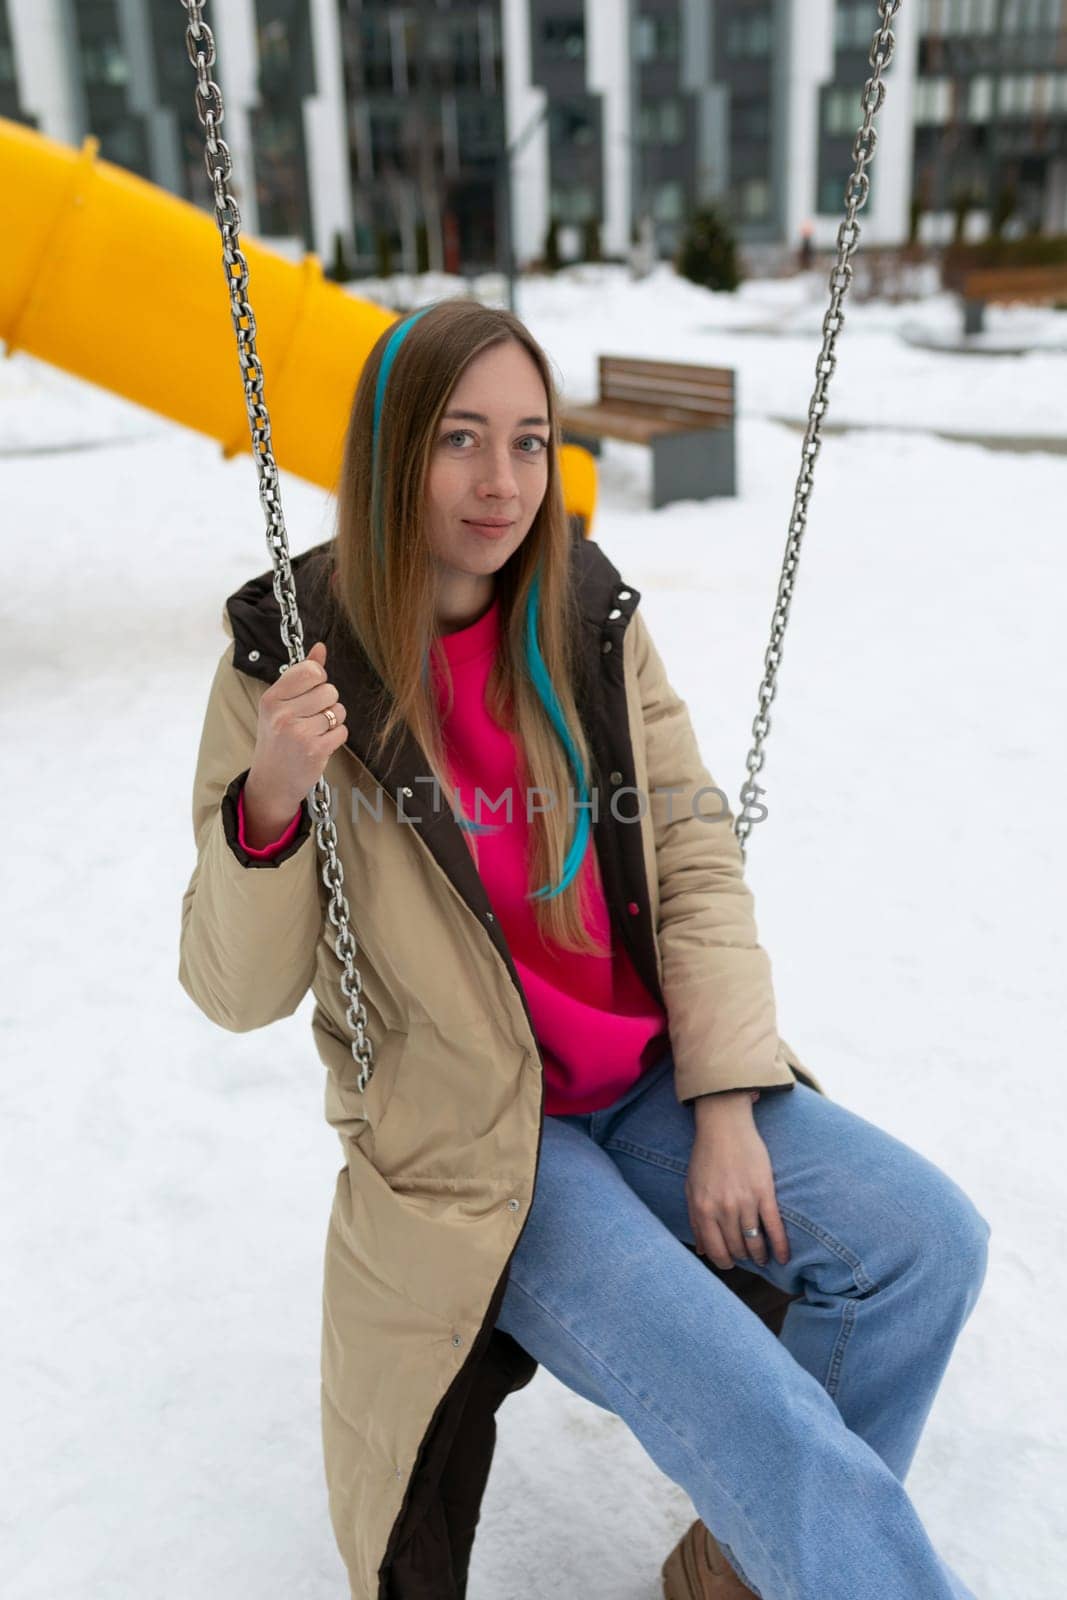 Woman Sitting on Swing in Snow by TRMK